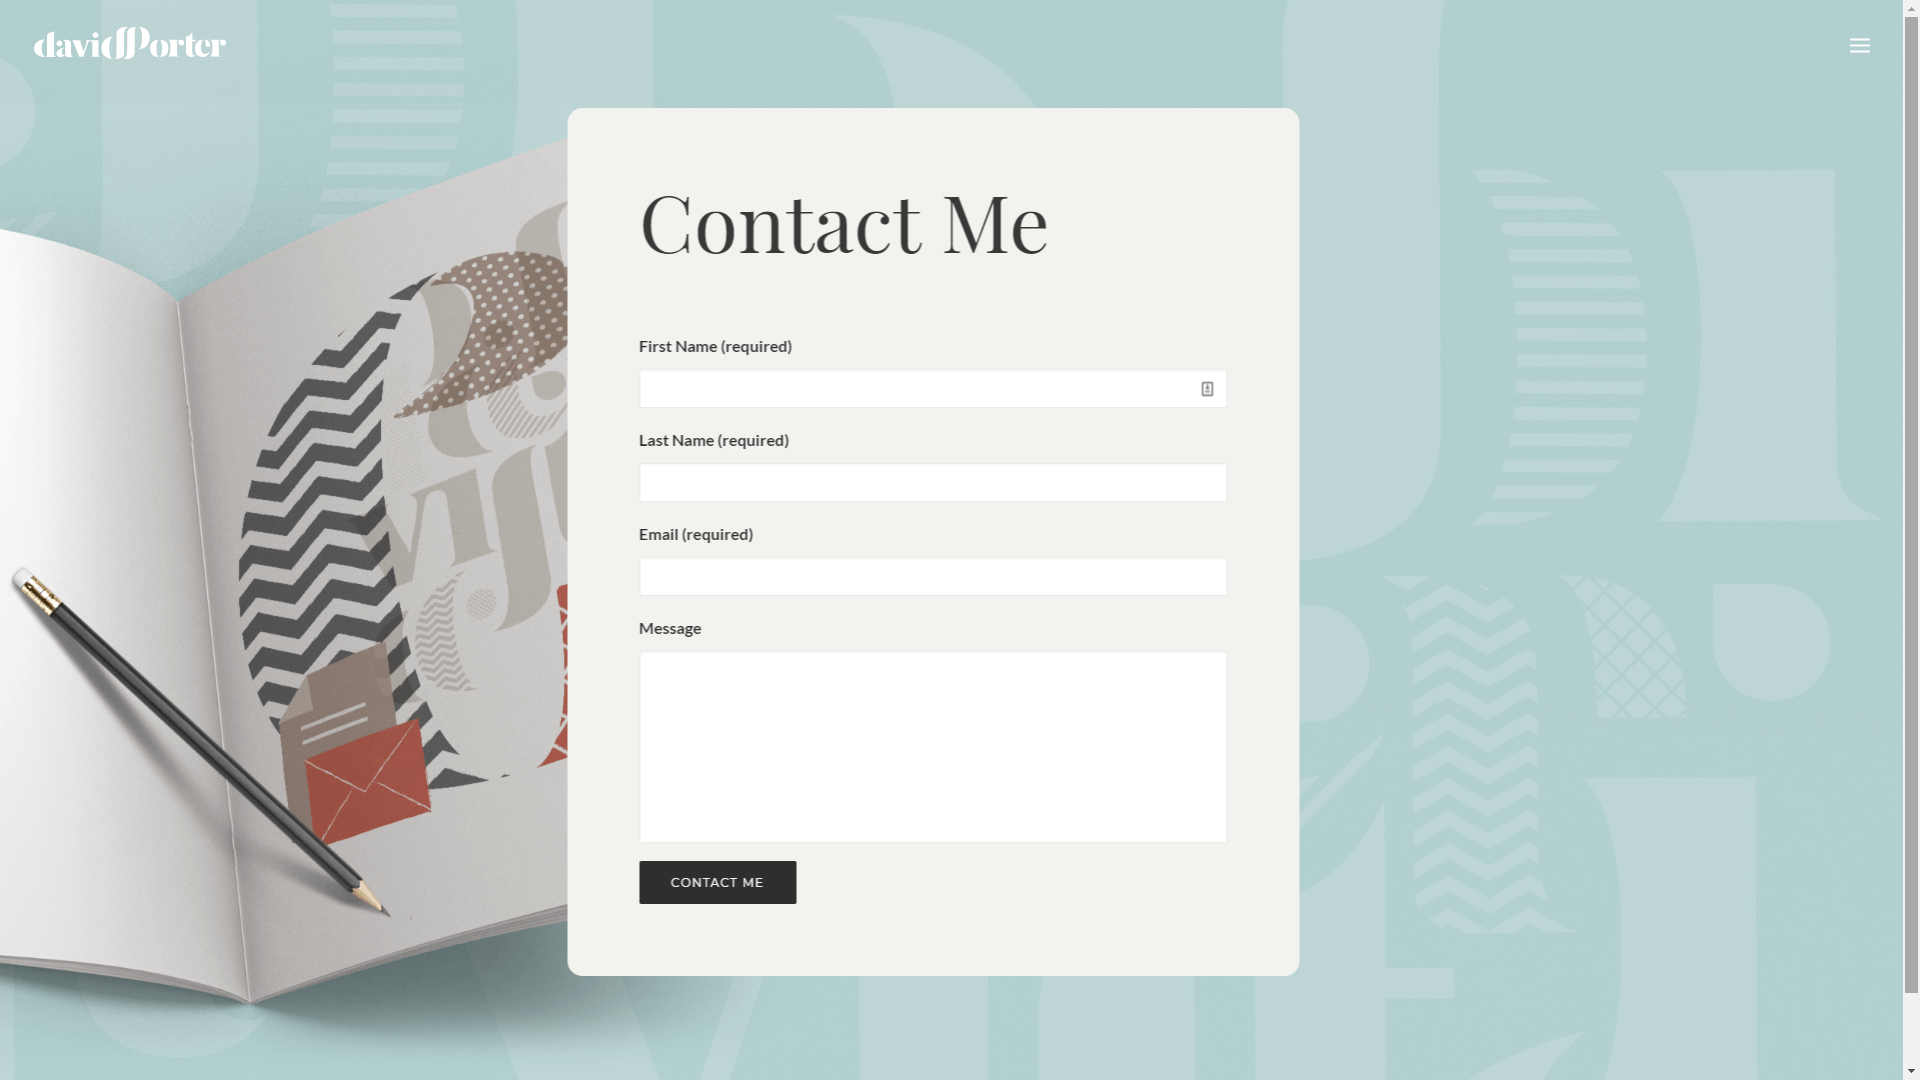 A homepage contact form.